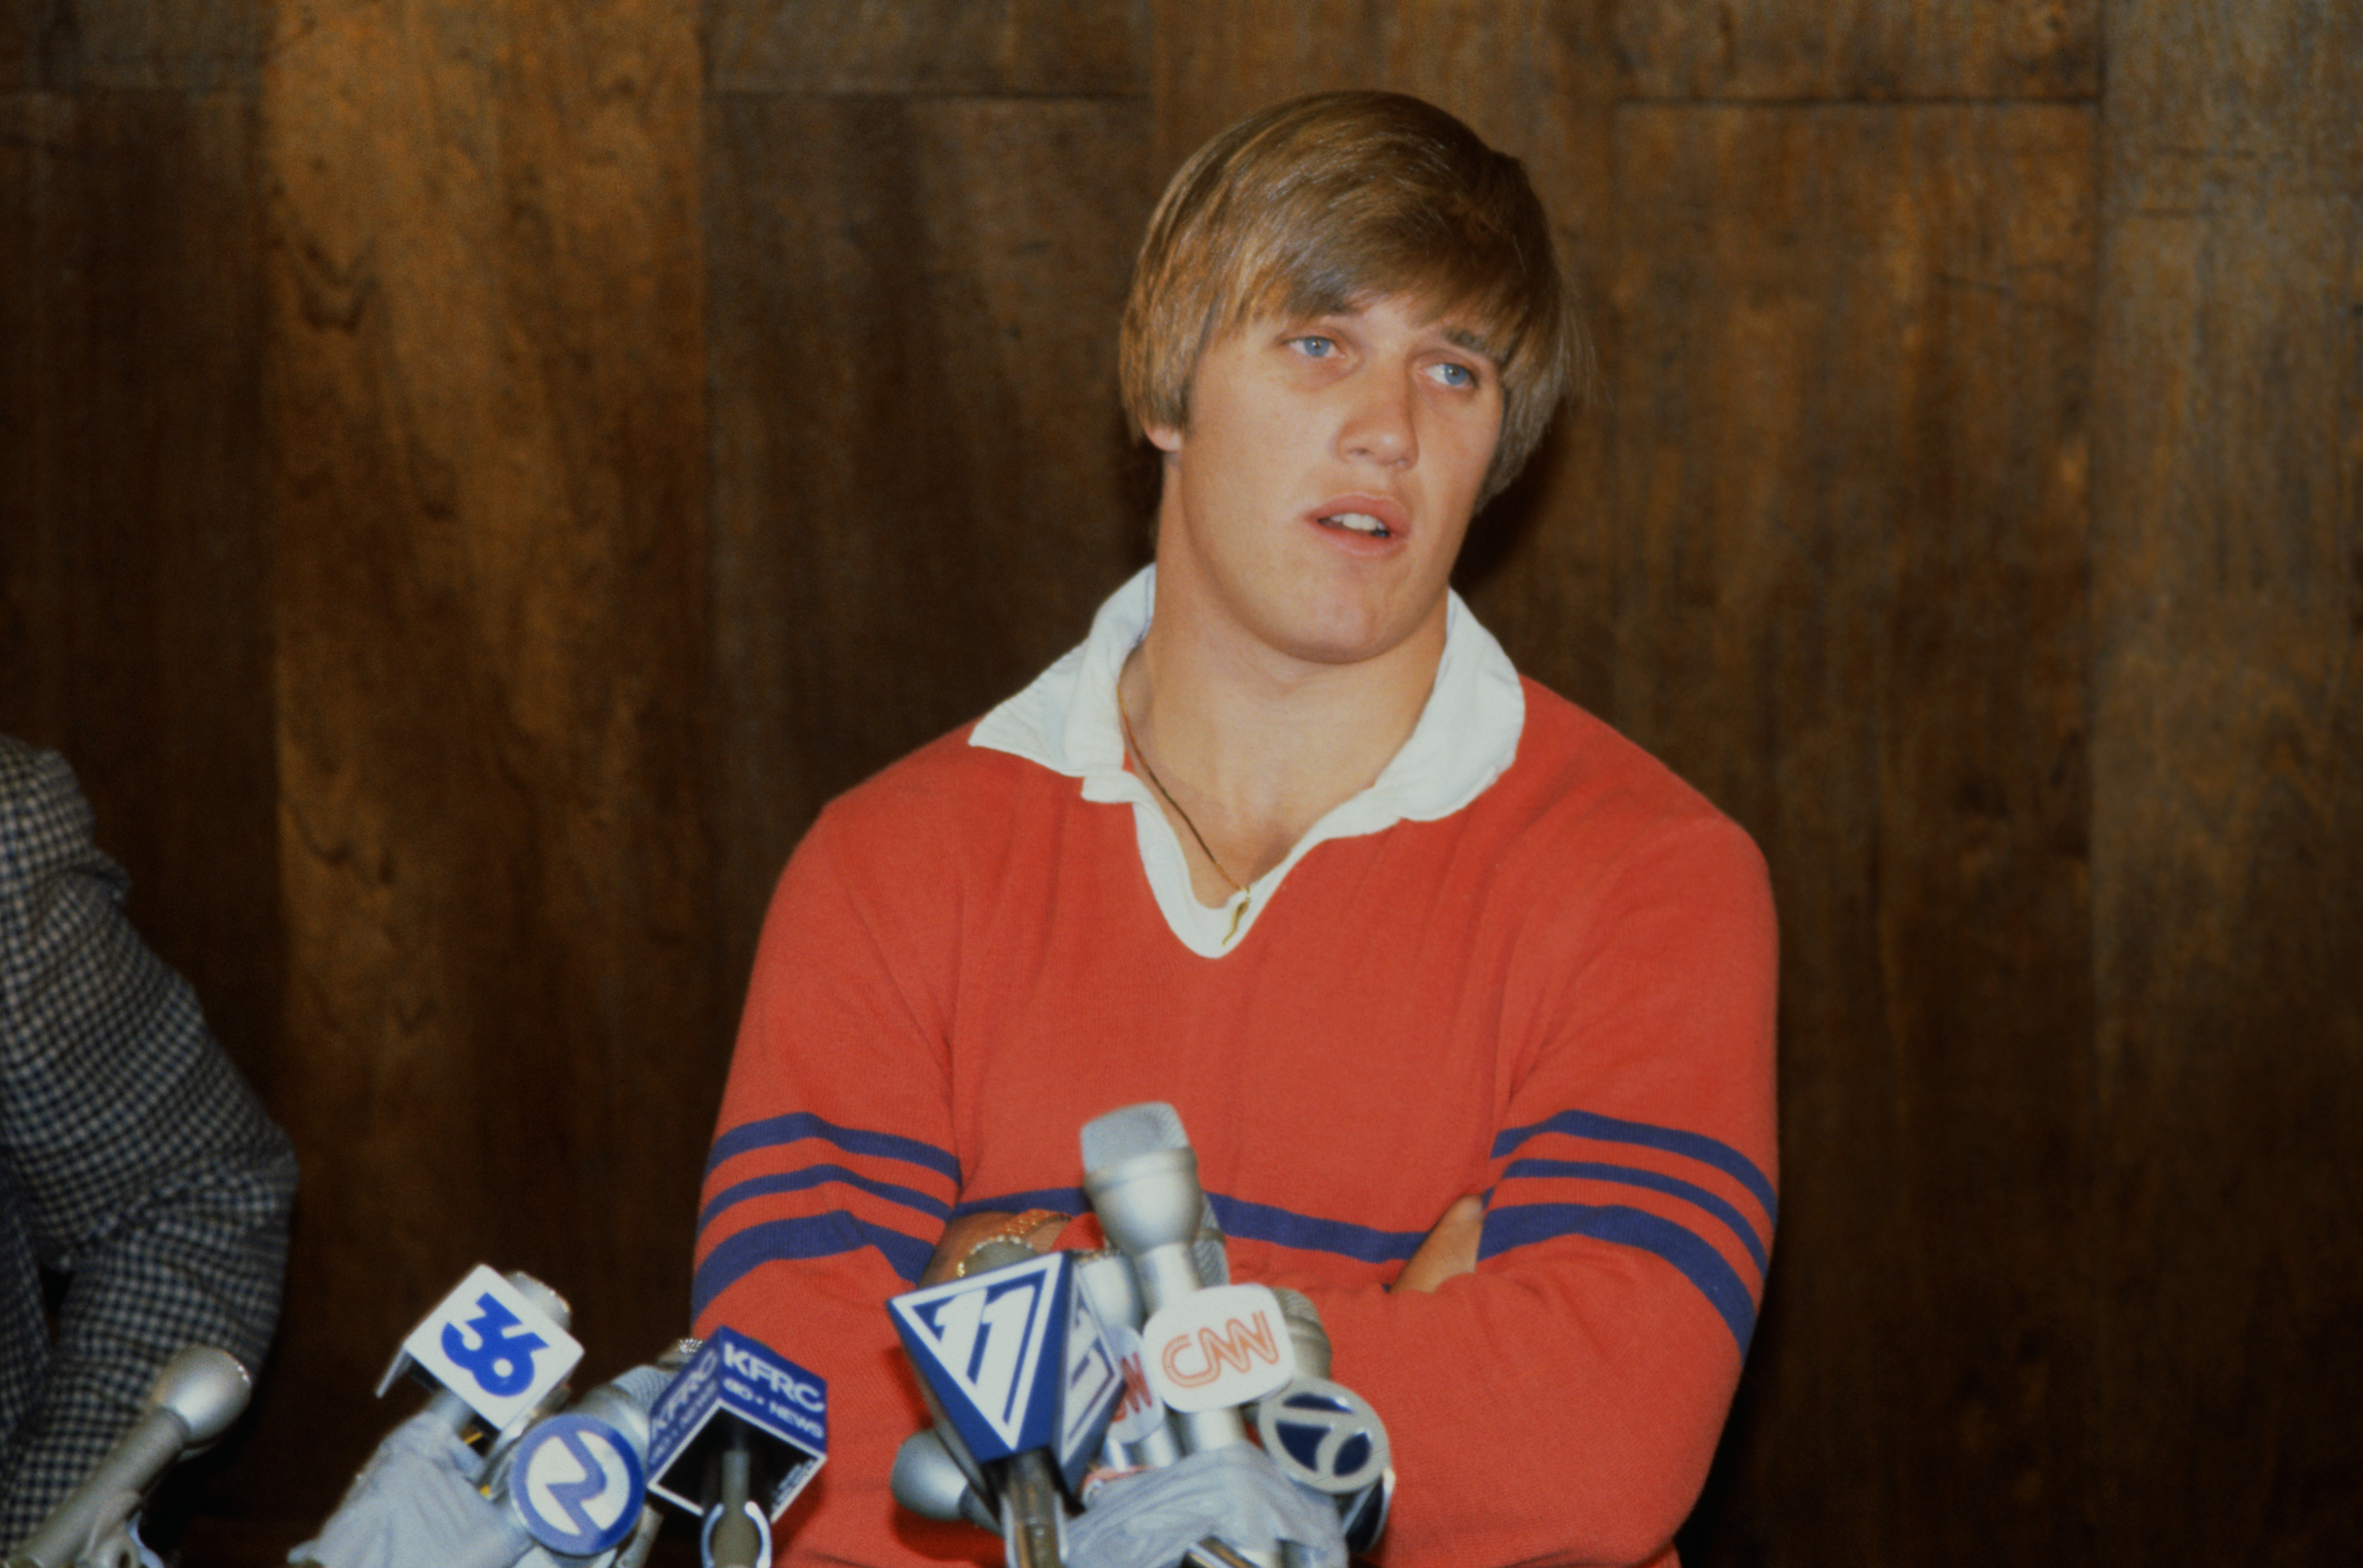 Quarterback John Elway speaks to reporters after reaching a deal with the Broncos